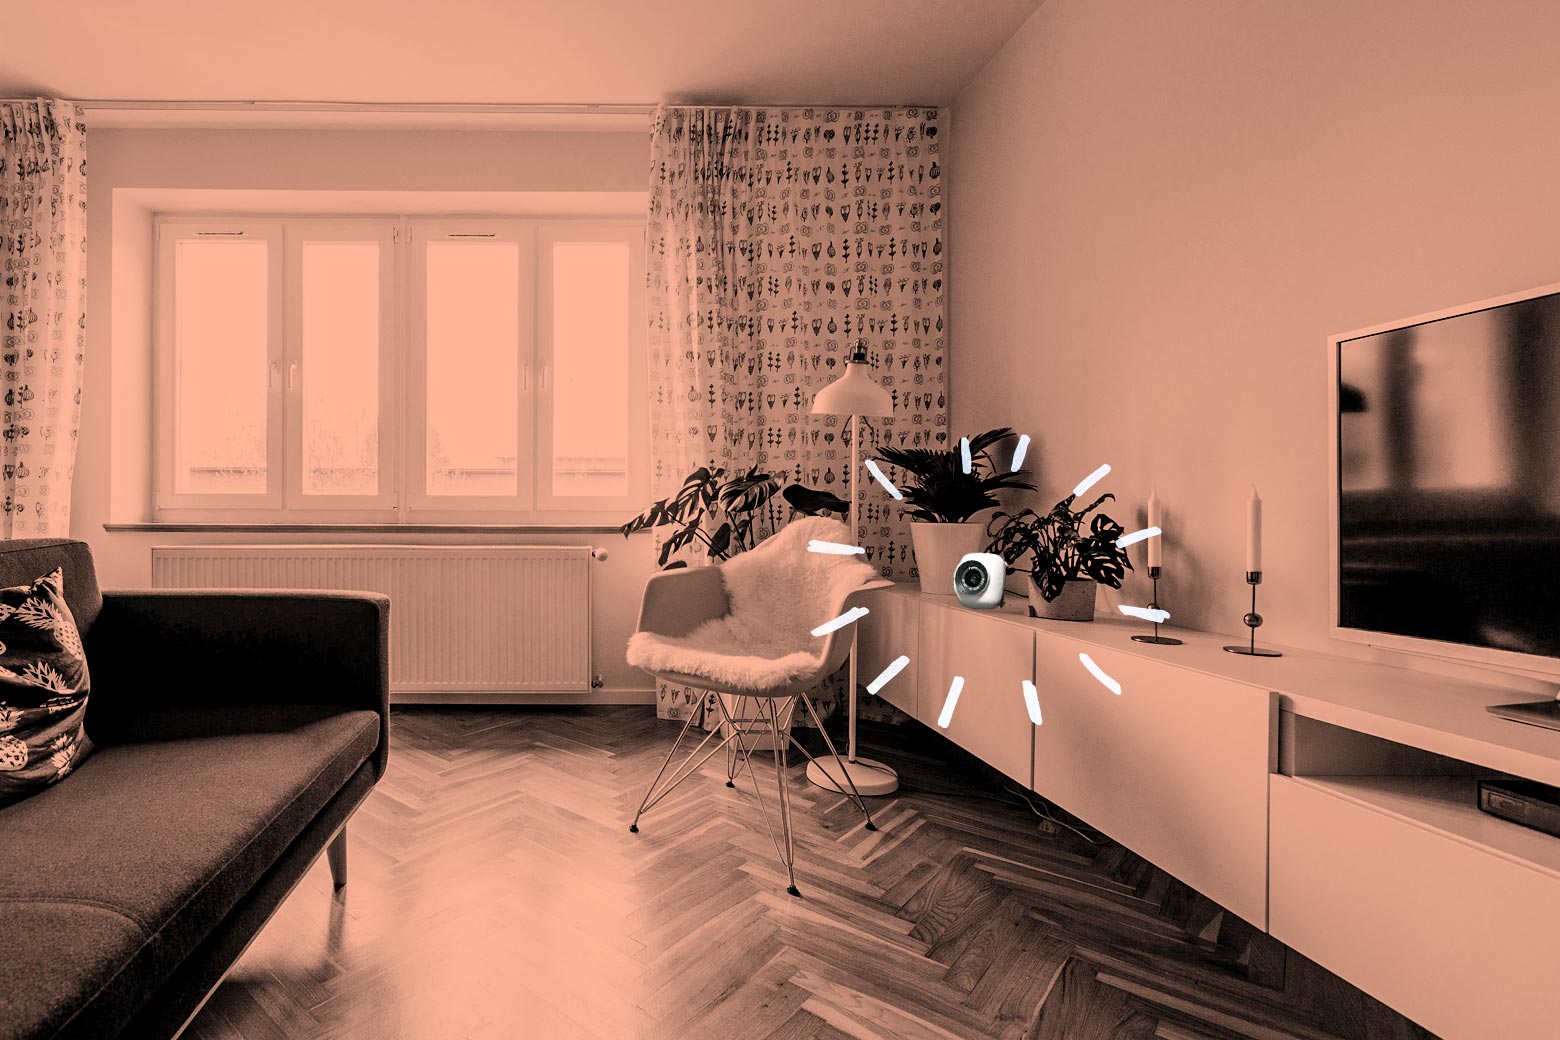 How to scan your Airbnb for hidden cameras.